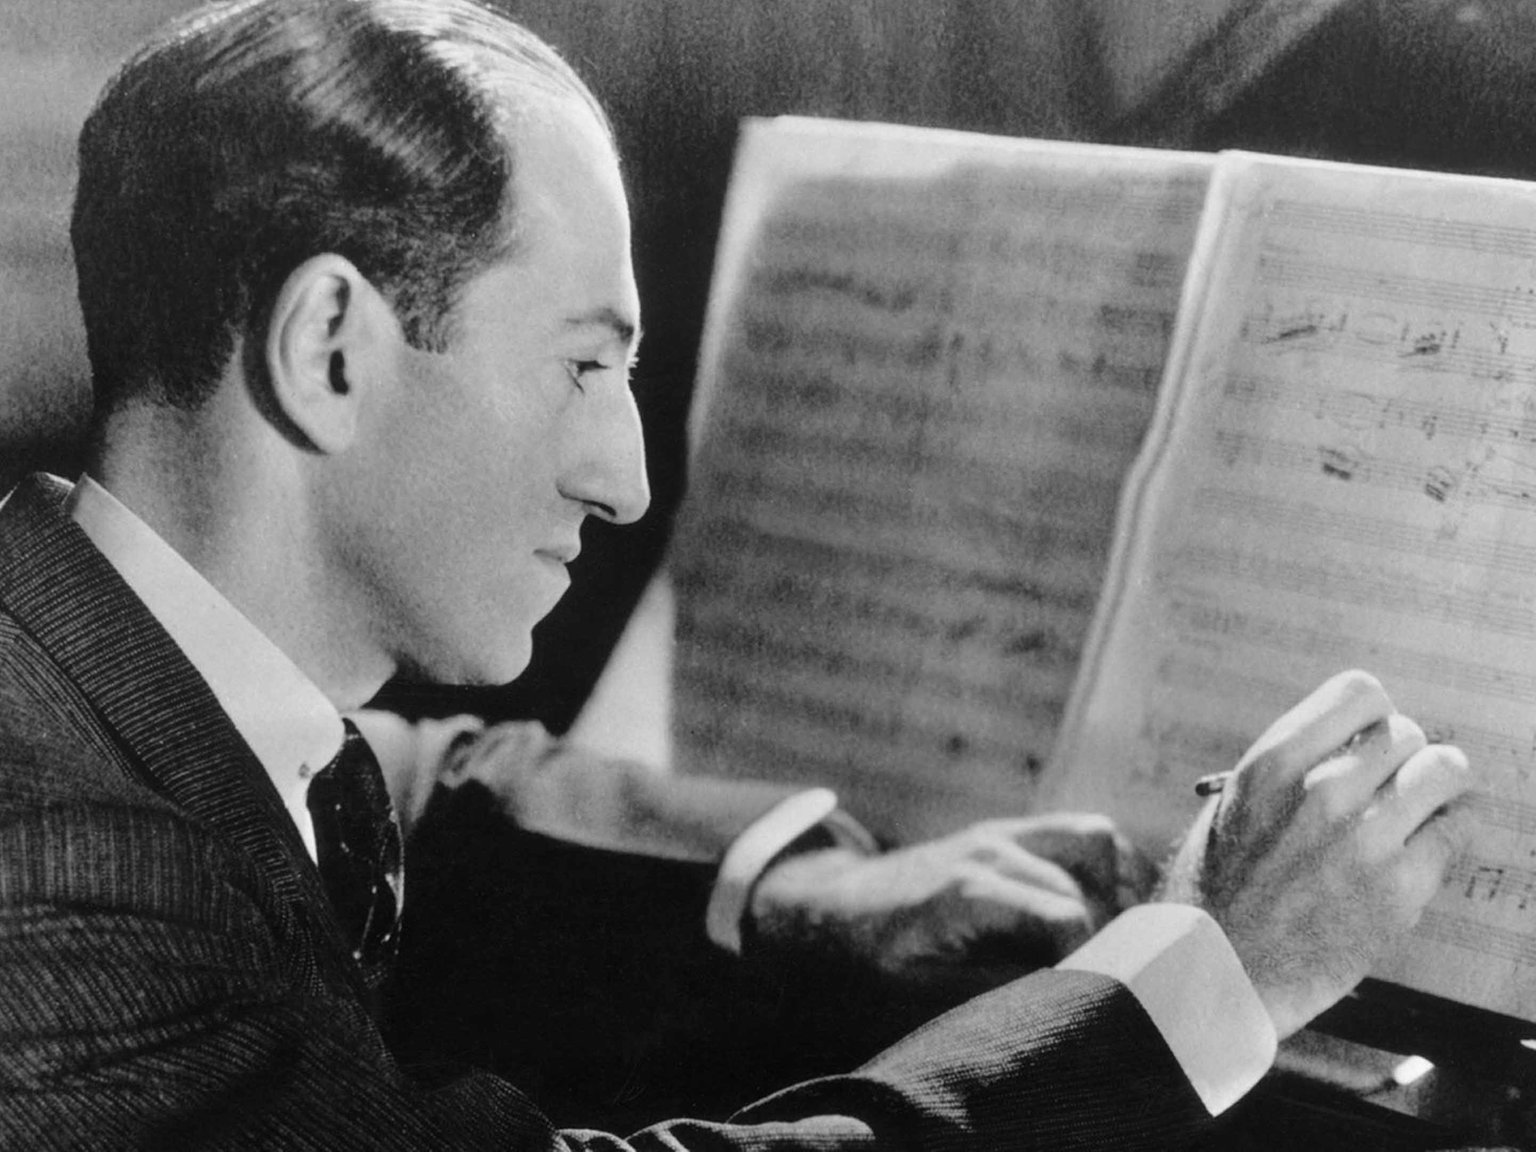 Which Major American Composer Brought Jazz To Carnegie Hall In New York In The 1930s